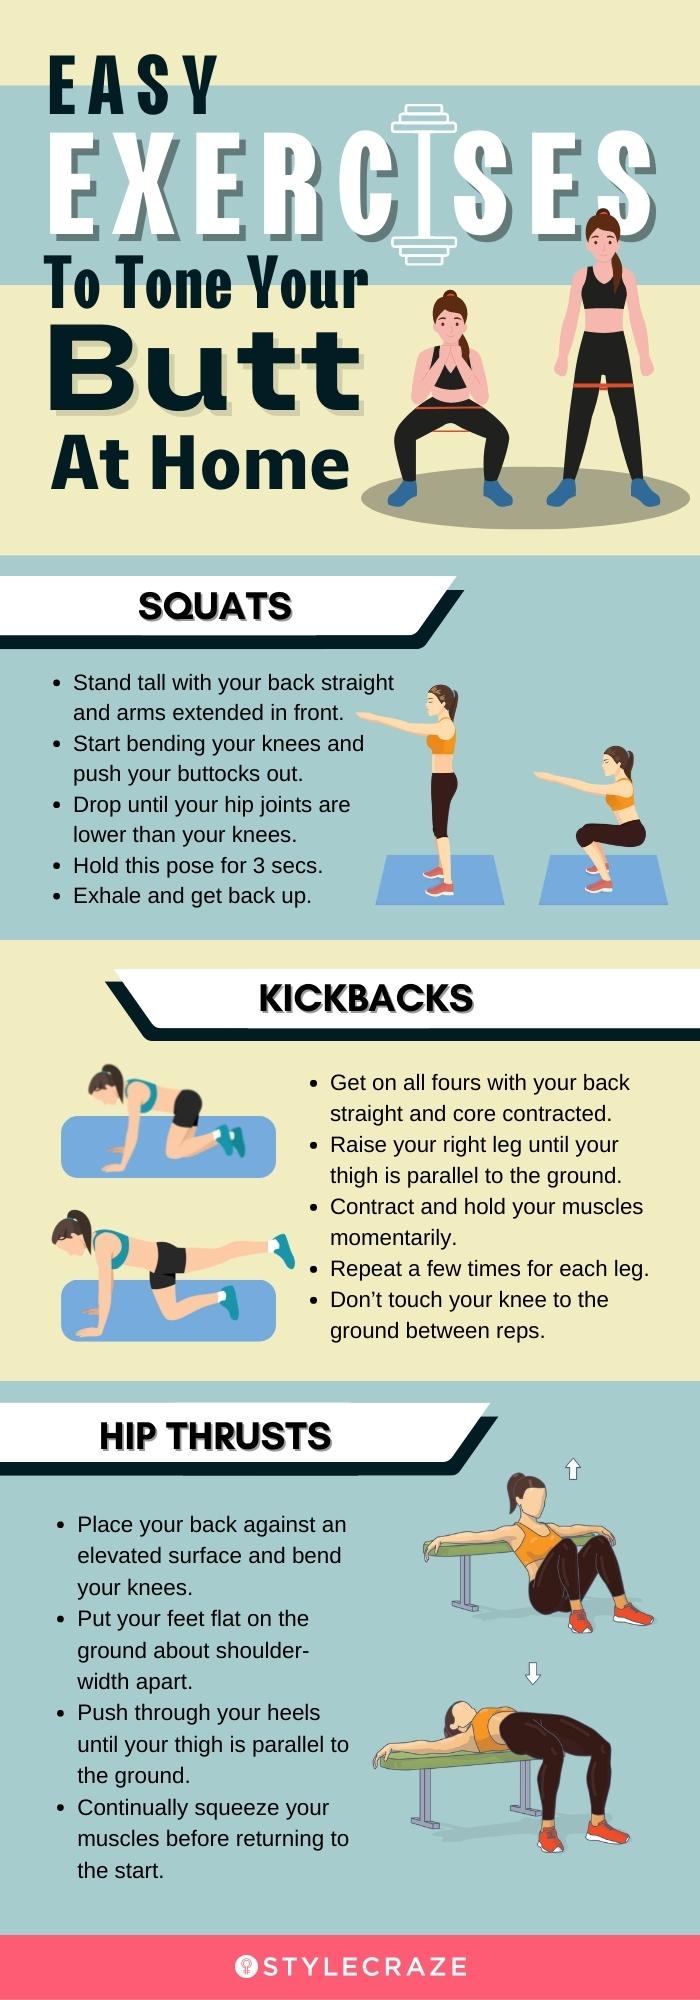 easy exercises to tone your butt at home (infographic)